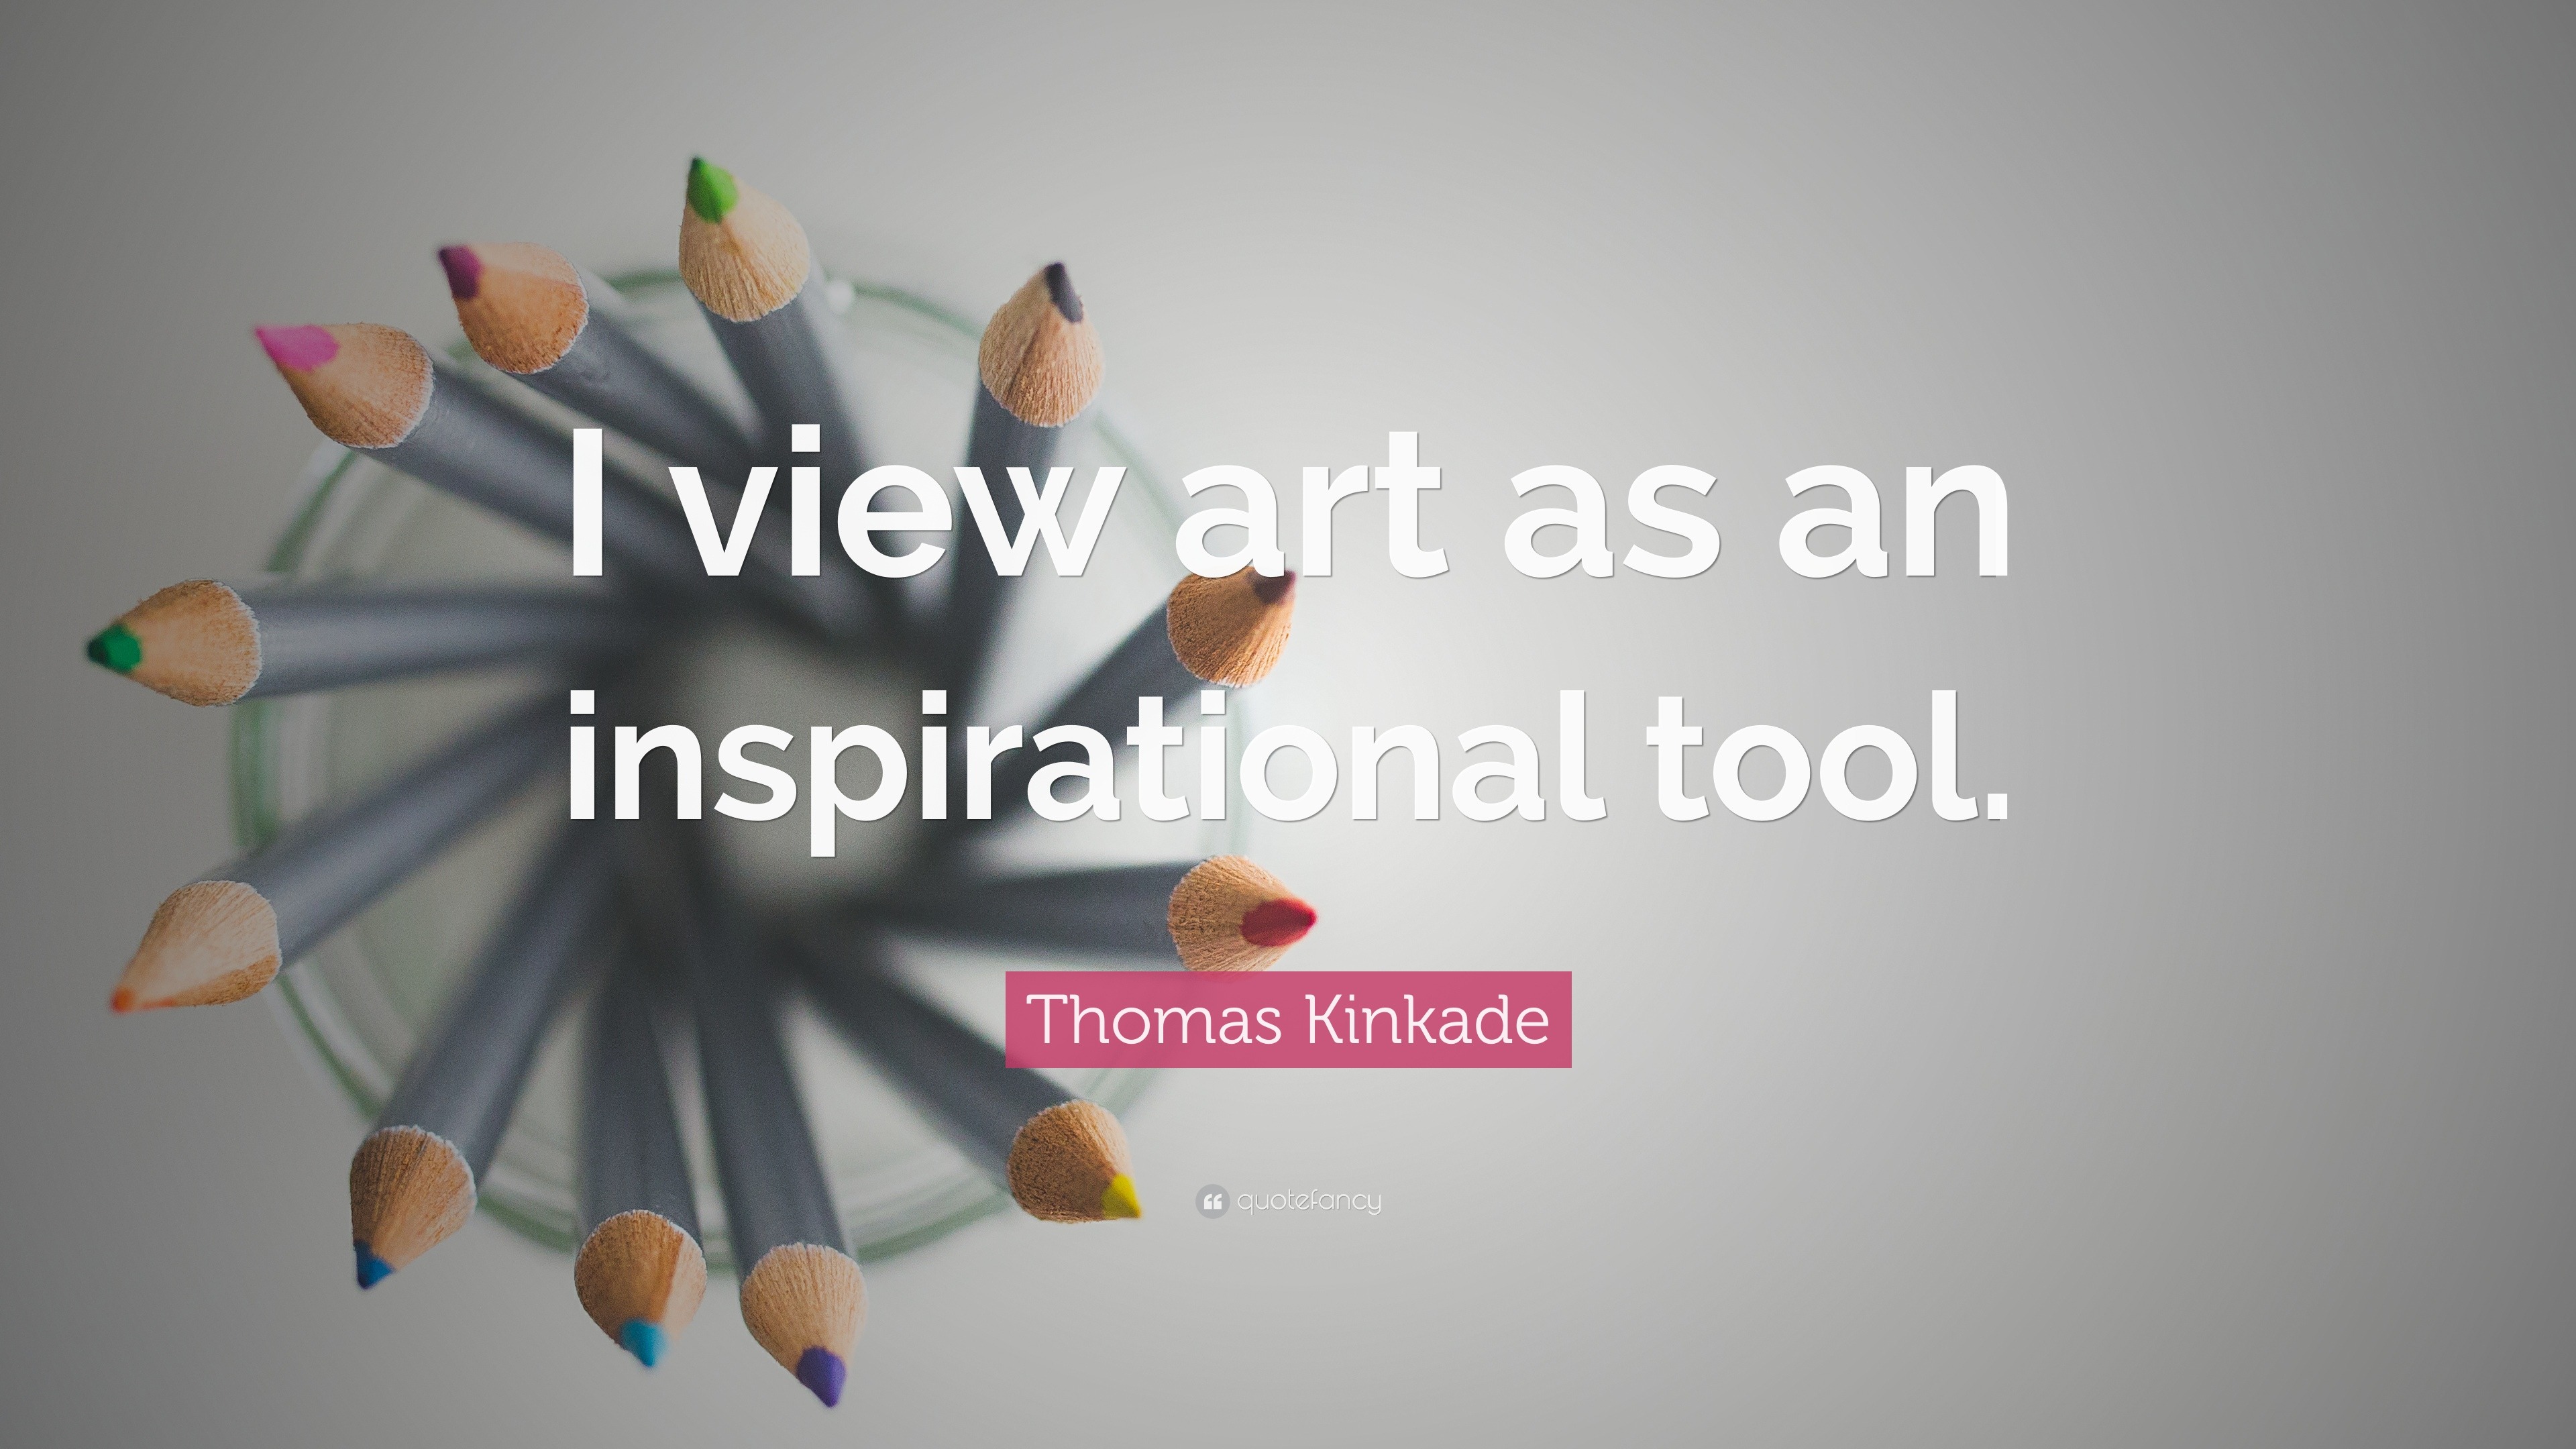 Art Inspiration Quotes #1 - YouTube